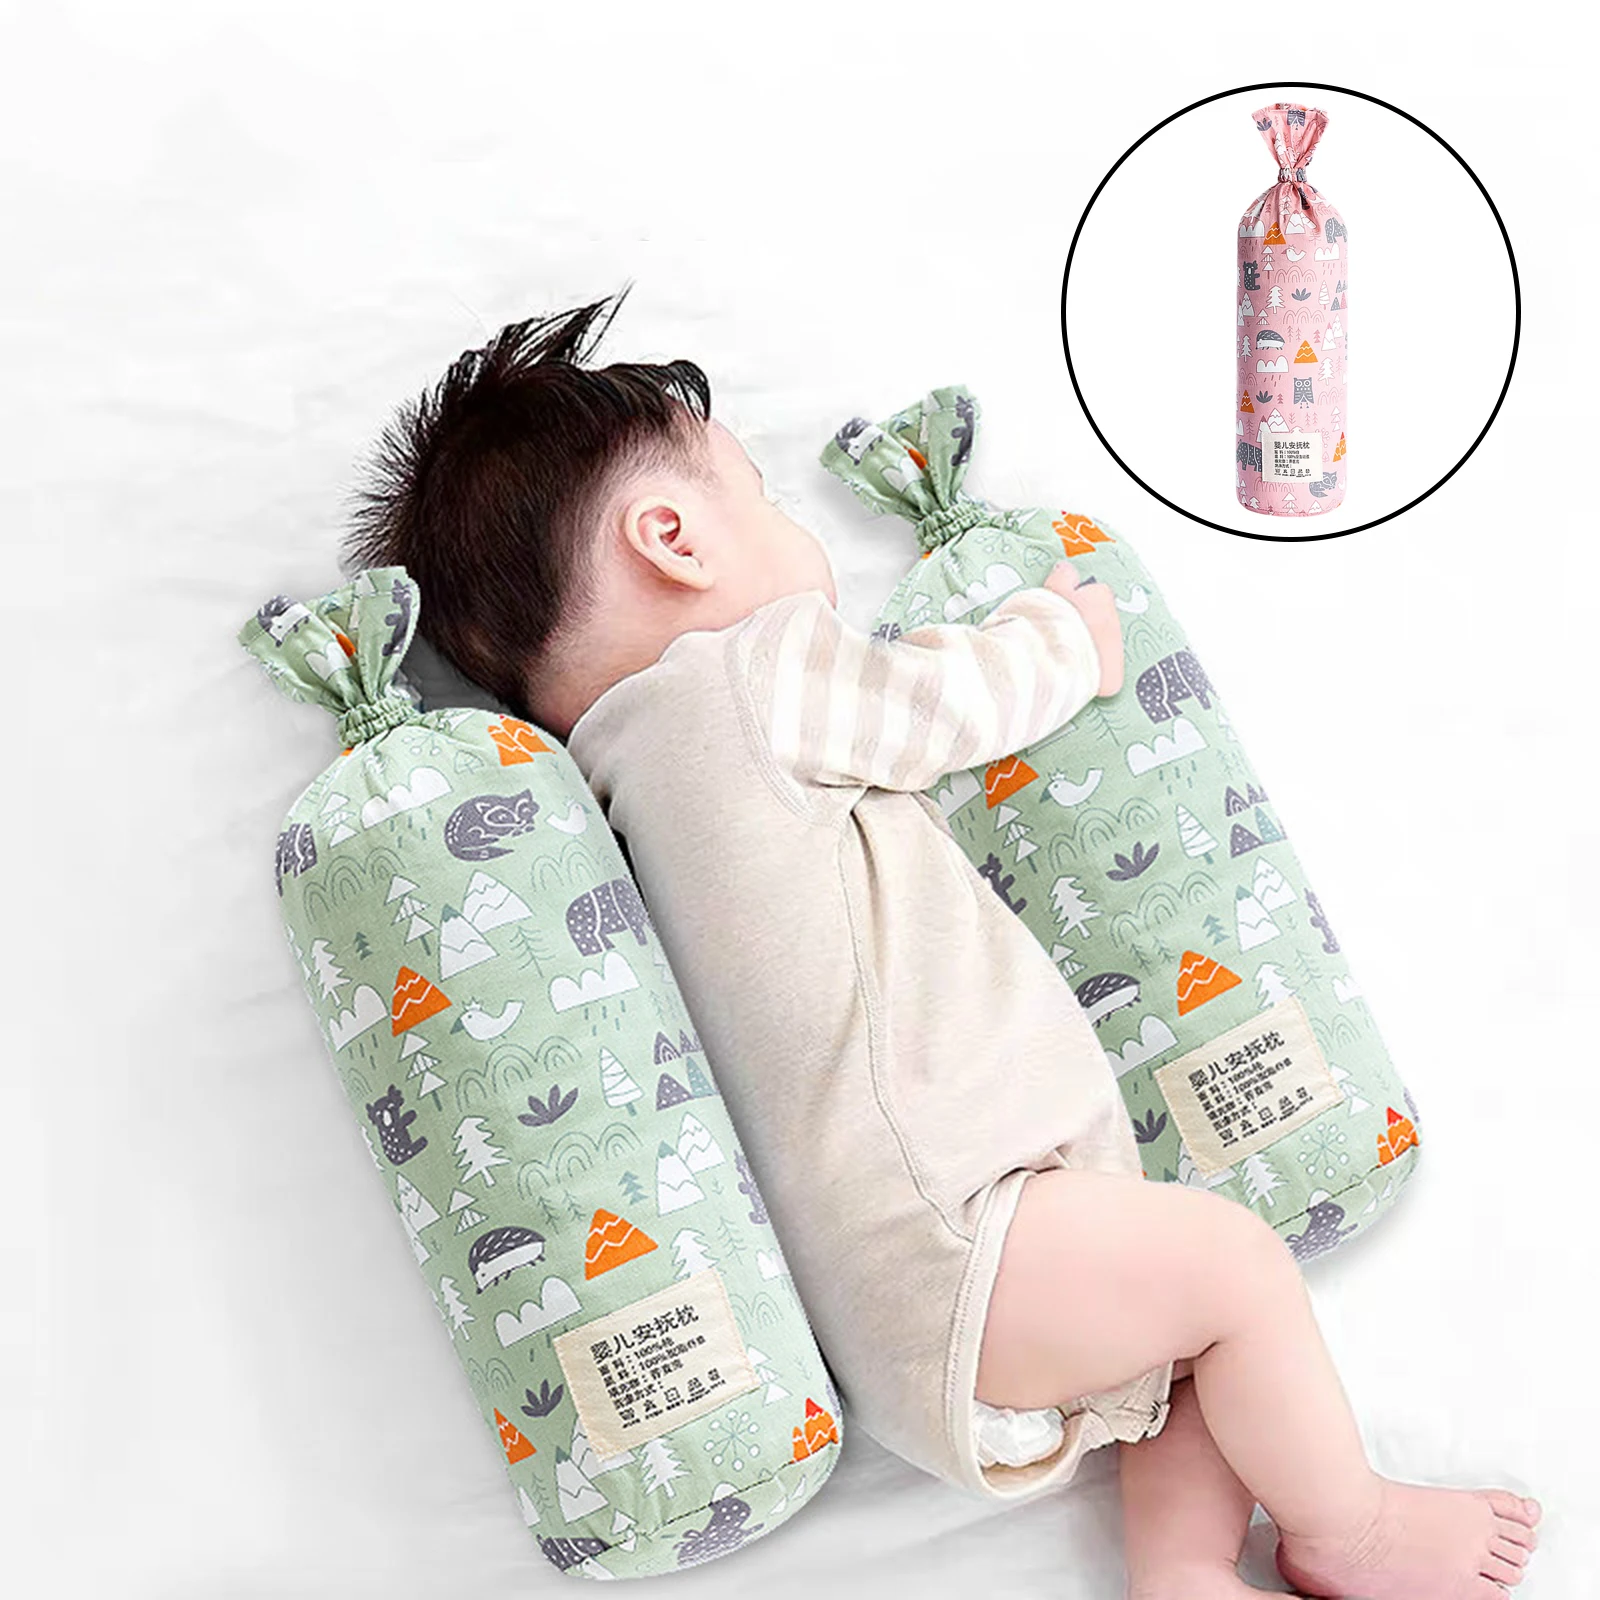 Printed Baby Pillow Soft Cotton Infant Newborn Sleeping Anti Rollover Pillow Neck Support Cushion Toddler